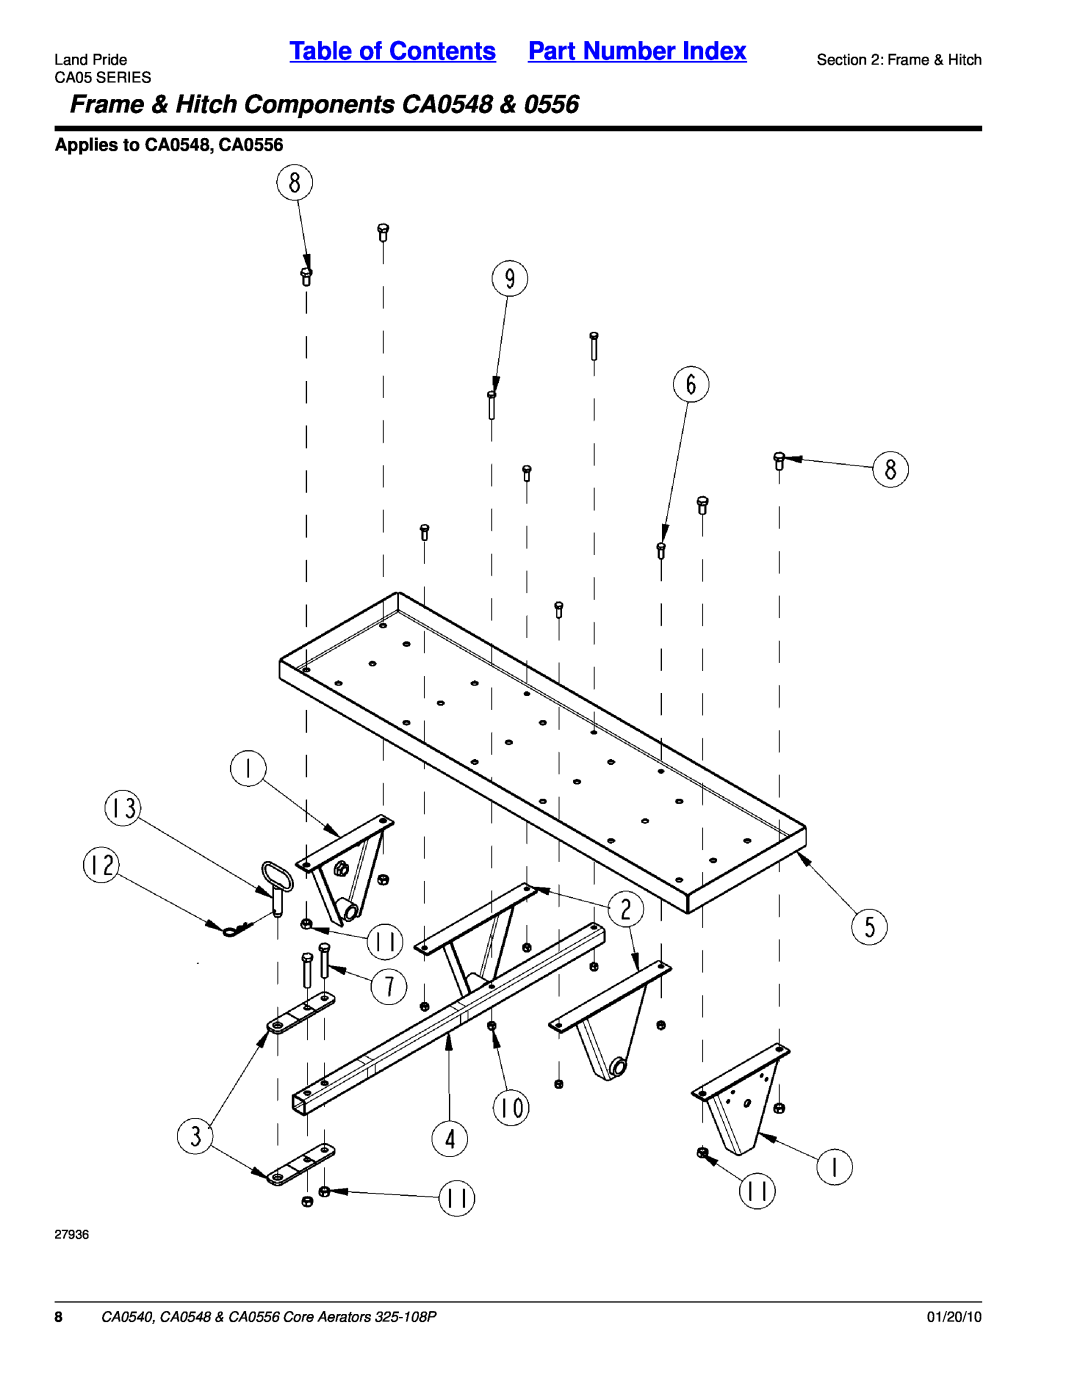 Land Pride Frame & Hitch Components CA0548, Applies to CA0548, CA0556, Land PrideTable of Contents Part Number Index 